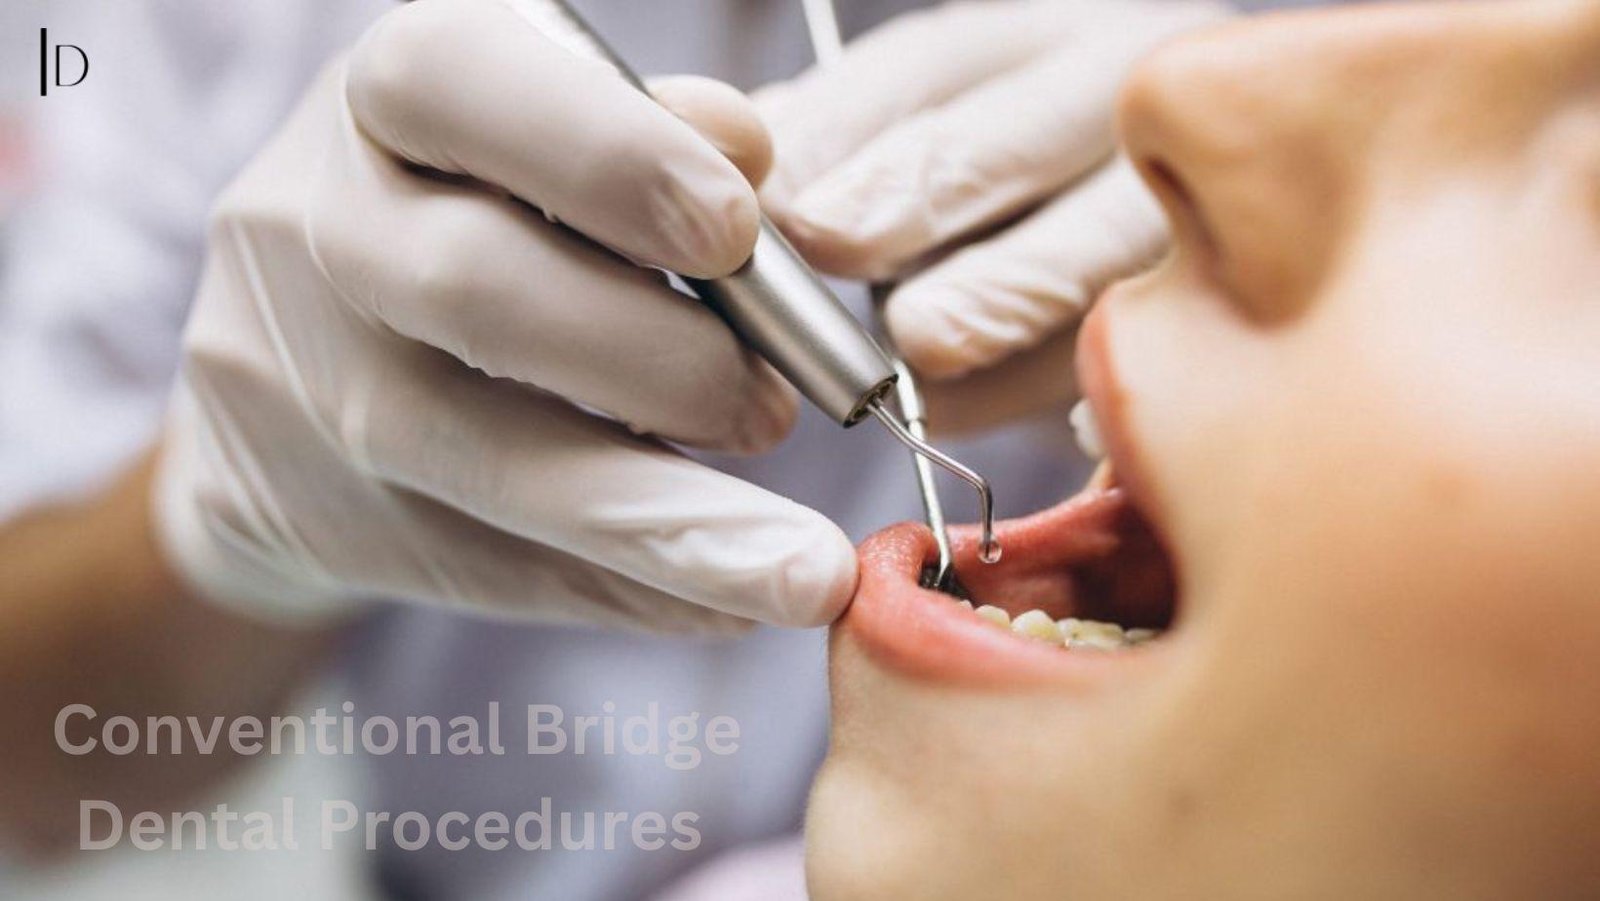 Benefits and Considerations of Conventional Bridge Dental Procedures